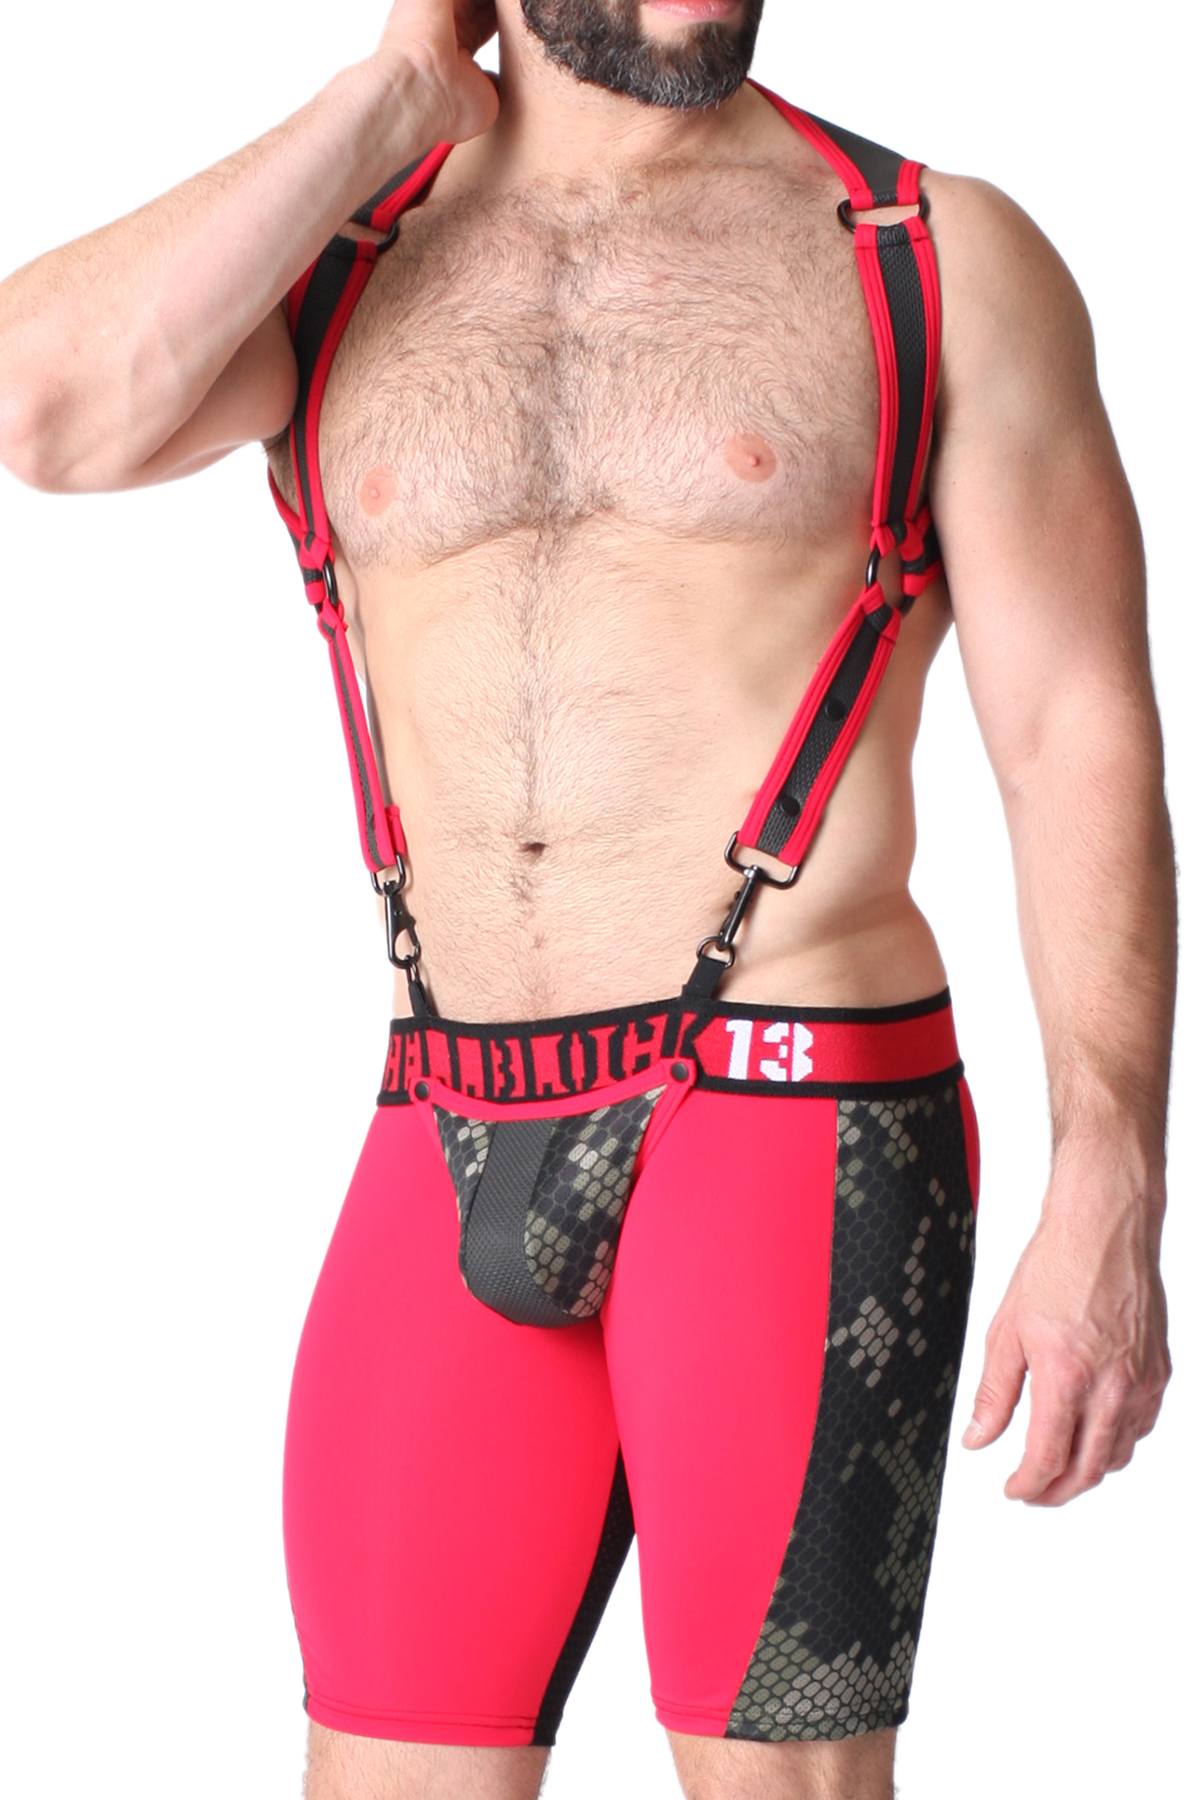 CellBlock 13 Red Cyber X-treme Short